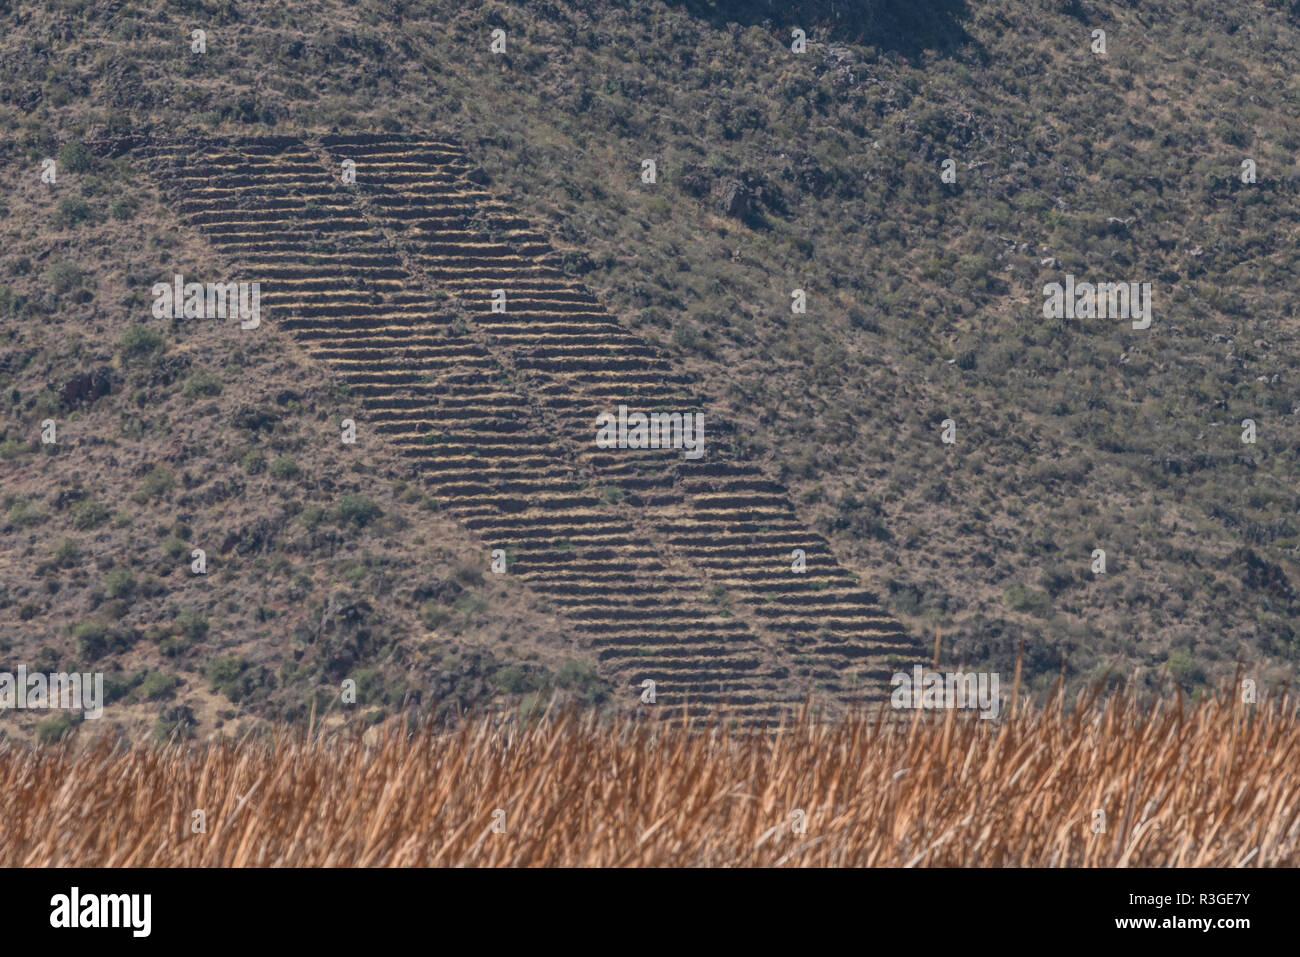 An ancient incan terrace preserved on a hillside, the incans used terracing for agricultural practices. Stock Photo